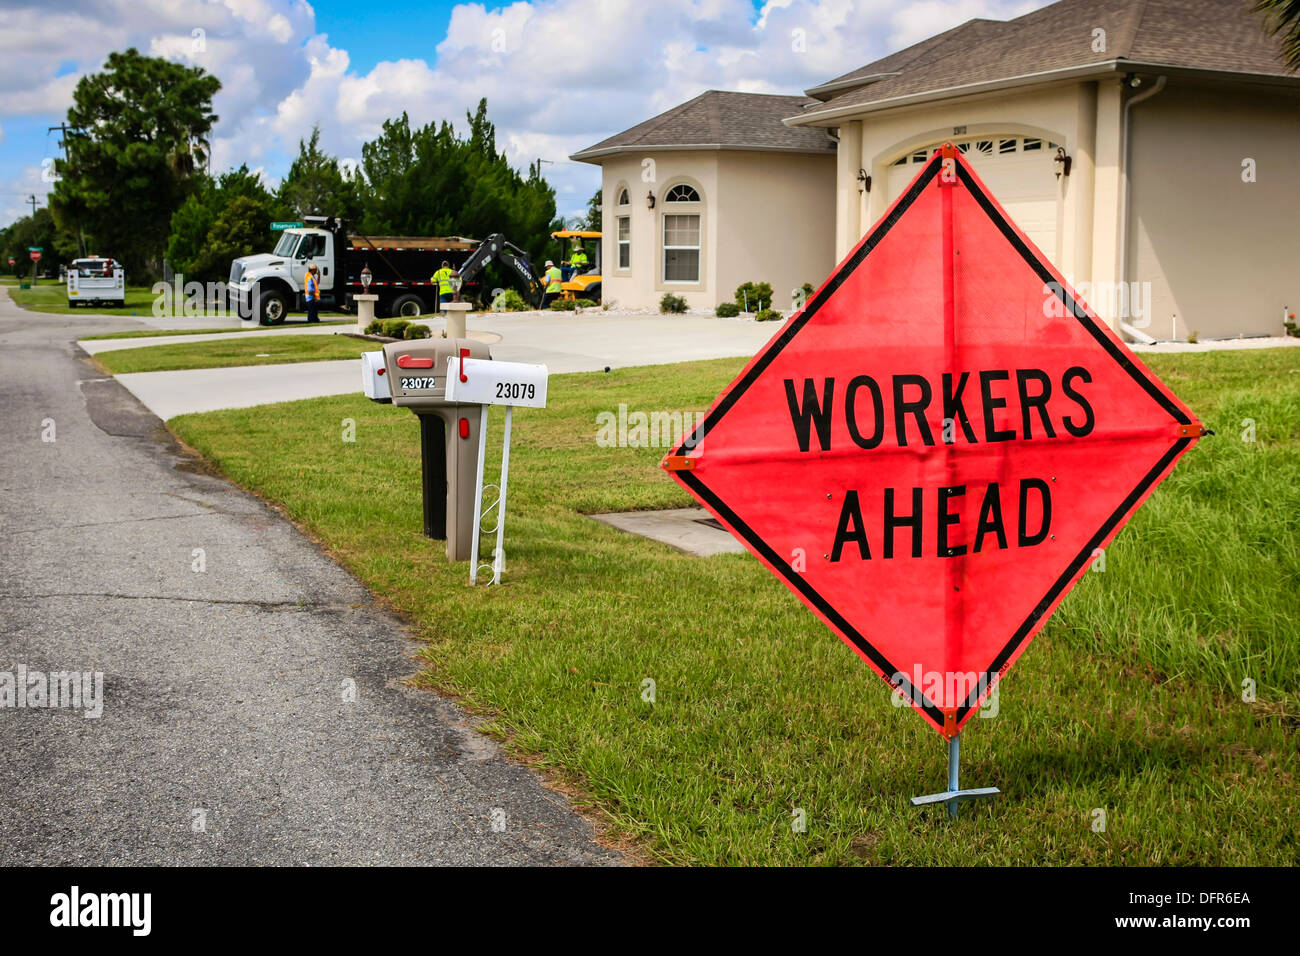 Large Diamond shaped sign alerting people that Workers are ahead Stock Photo